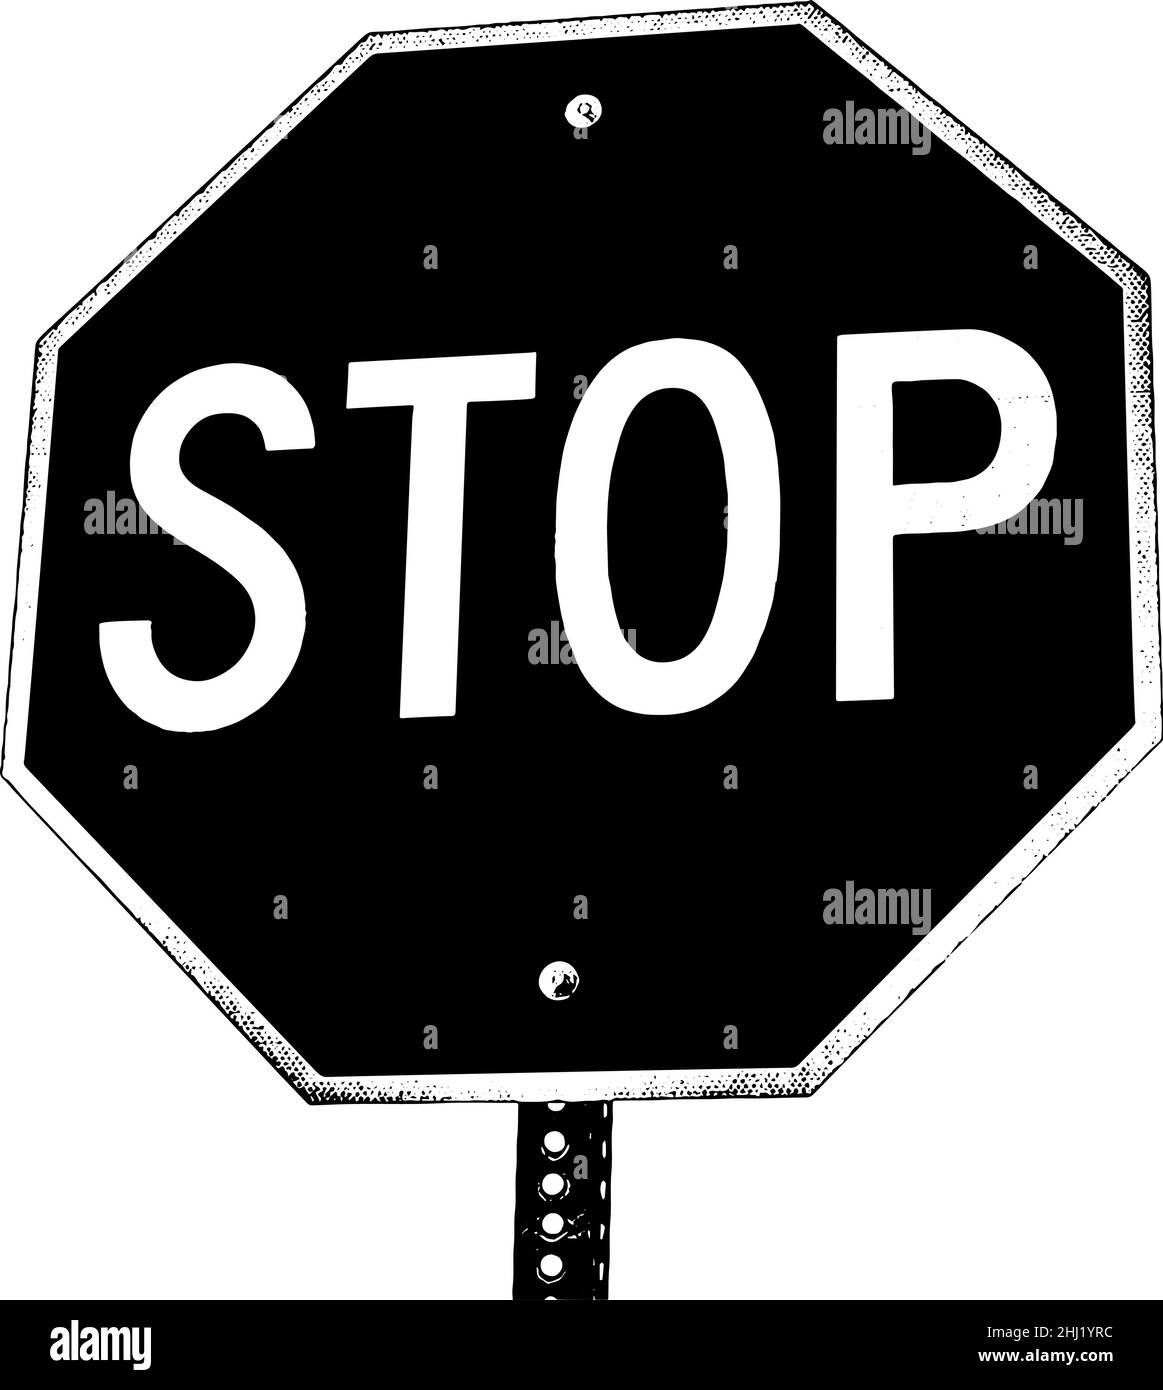 Stop sign vector illustration in black on white background Stock Vector